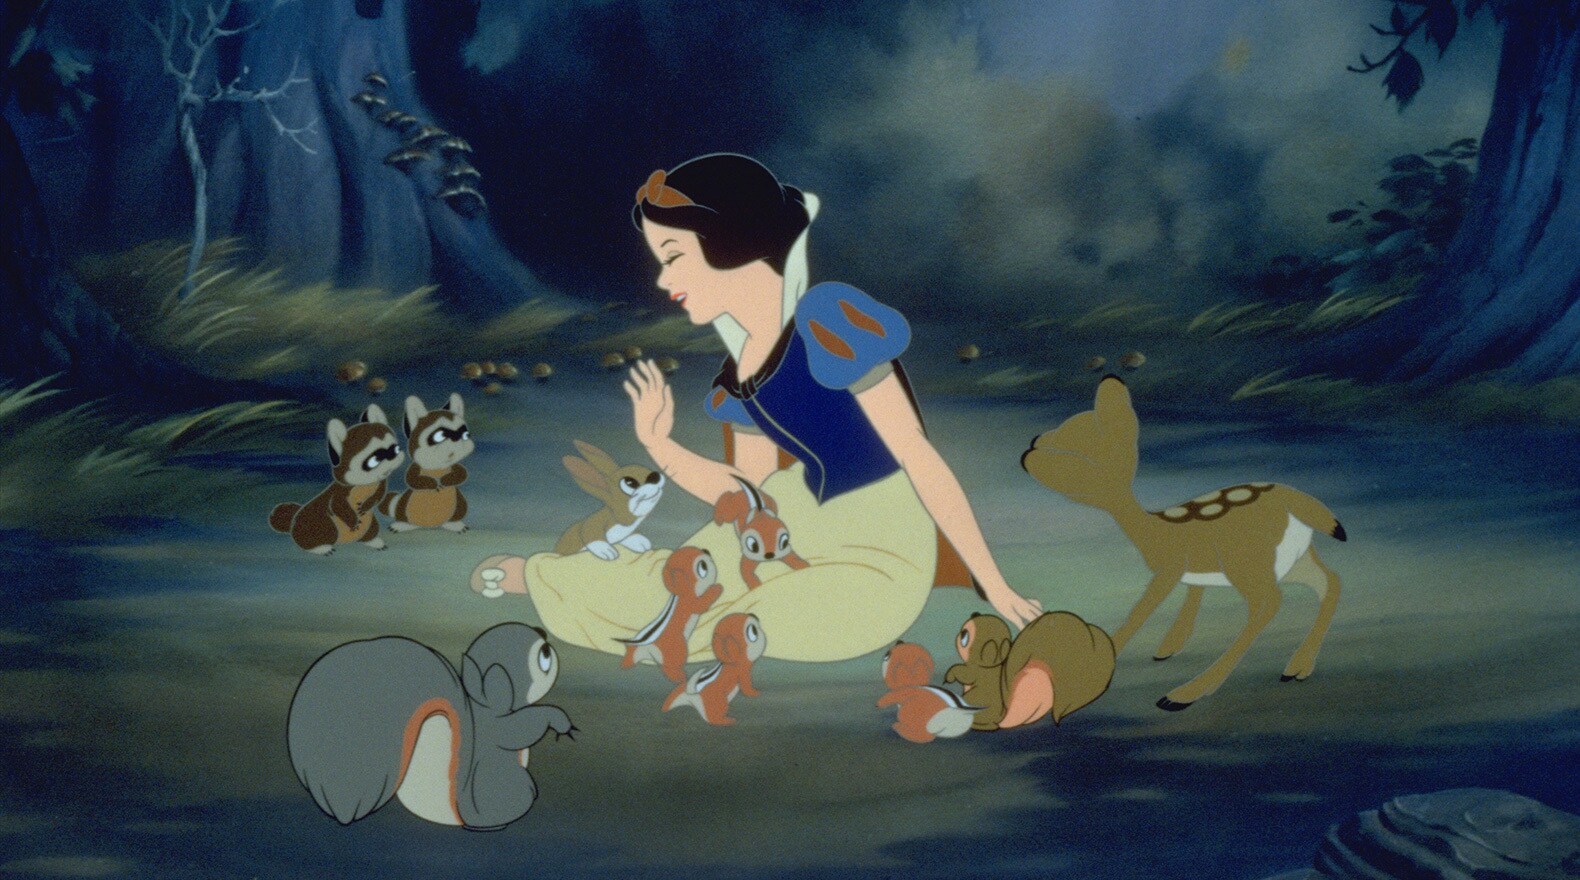 Snow White believes in being kind to all creatures.